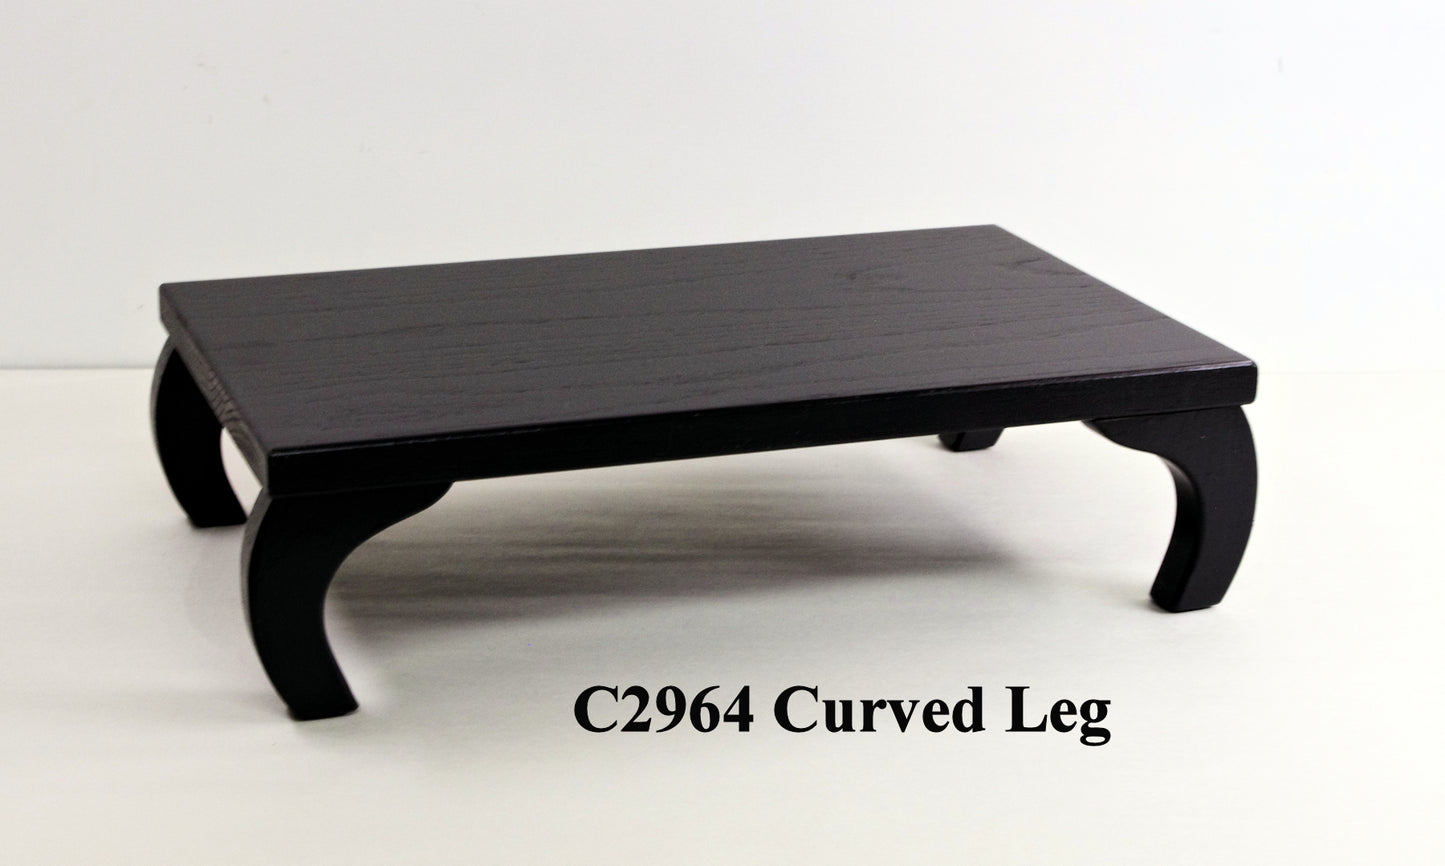 Bonsai Stand Curved Leg C2964 Made to Order 29" Length